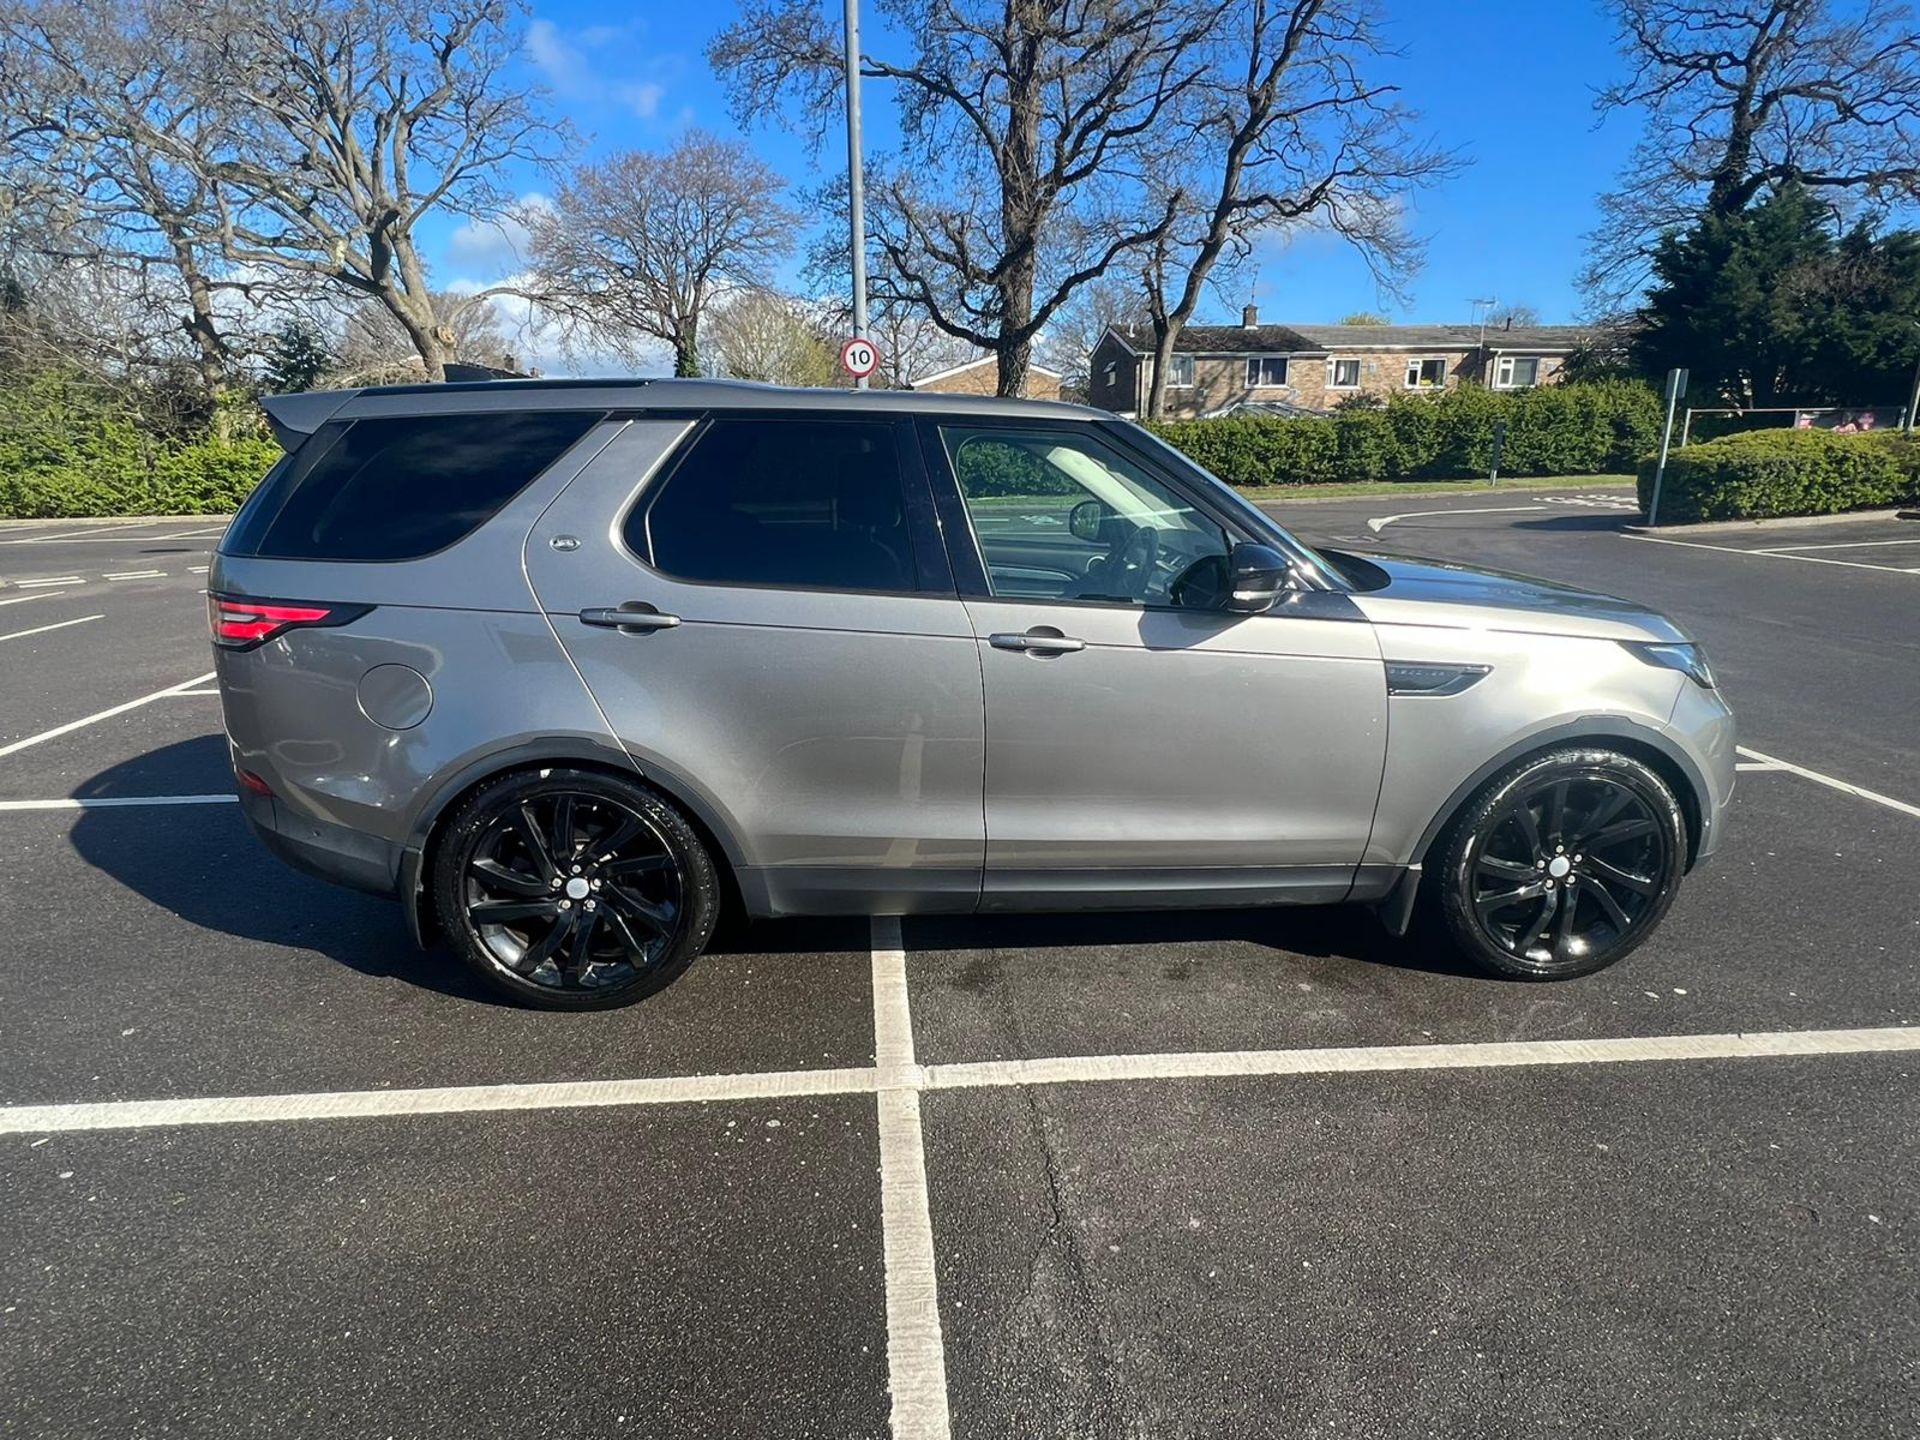 2017 LAND ROVERDISCOVERY FIRST EDITION TD6 AUTO SUV ESTATE, 93K MILES - Image 5 of 9